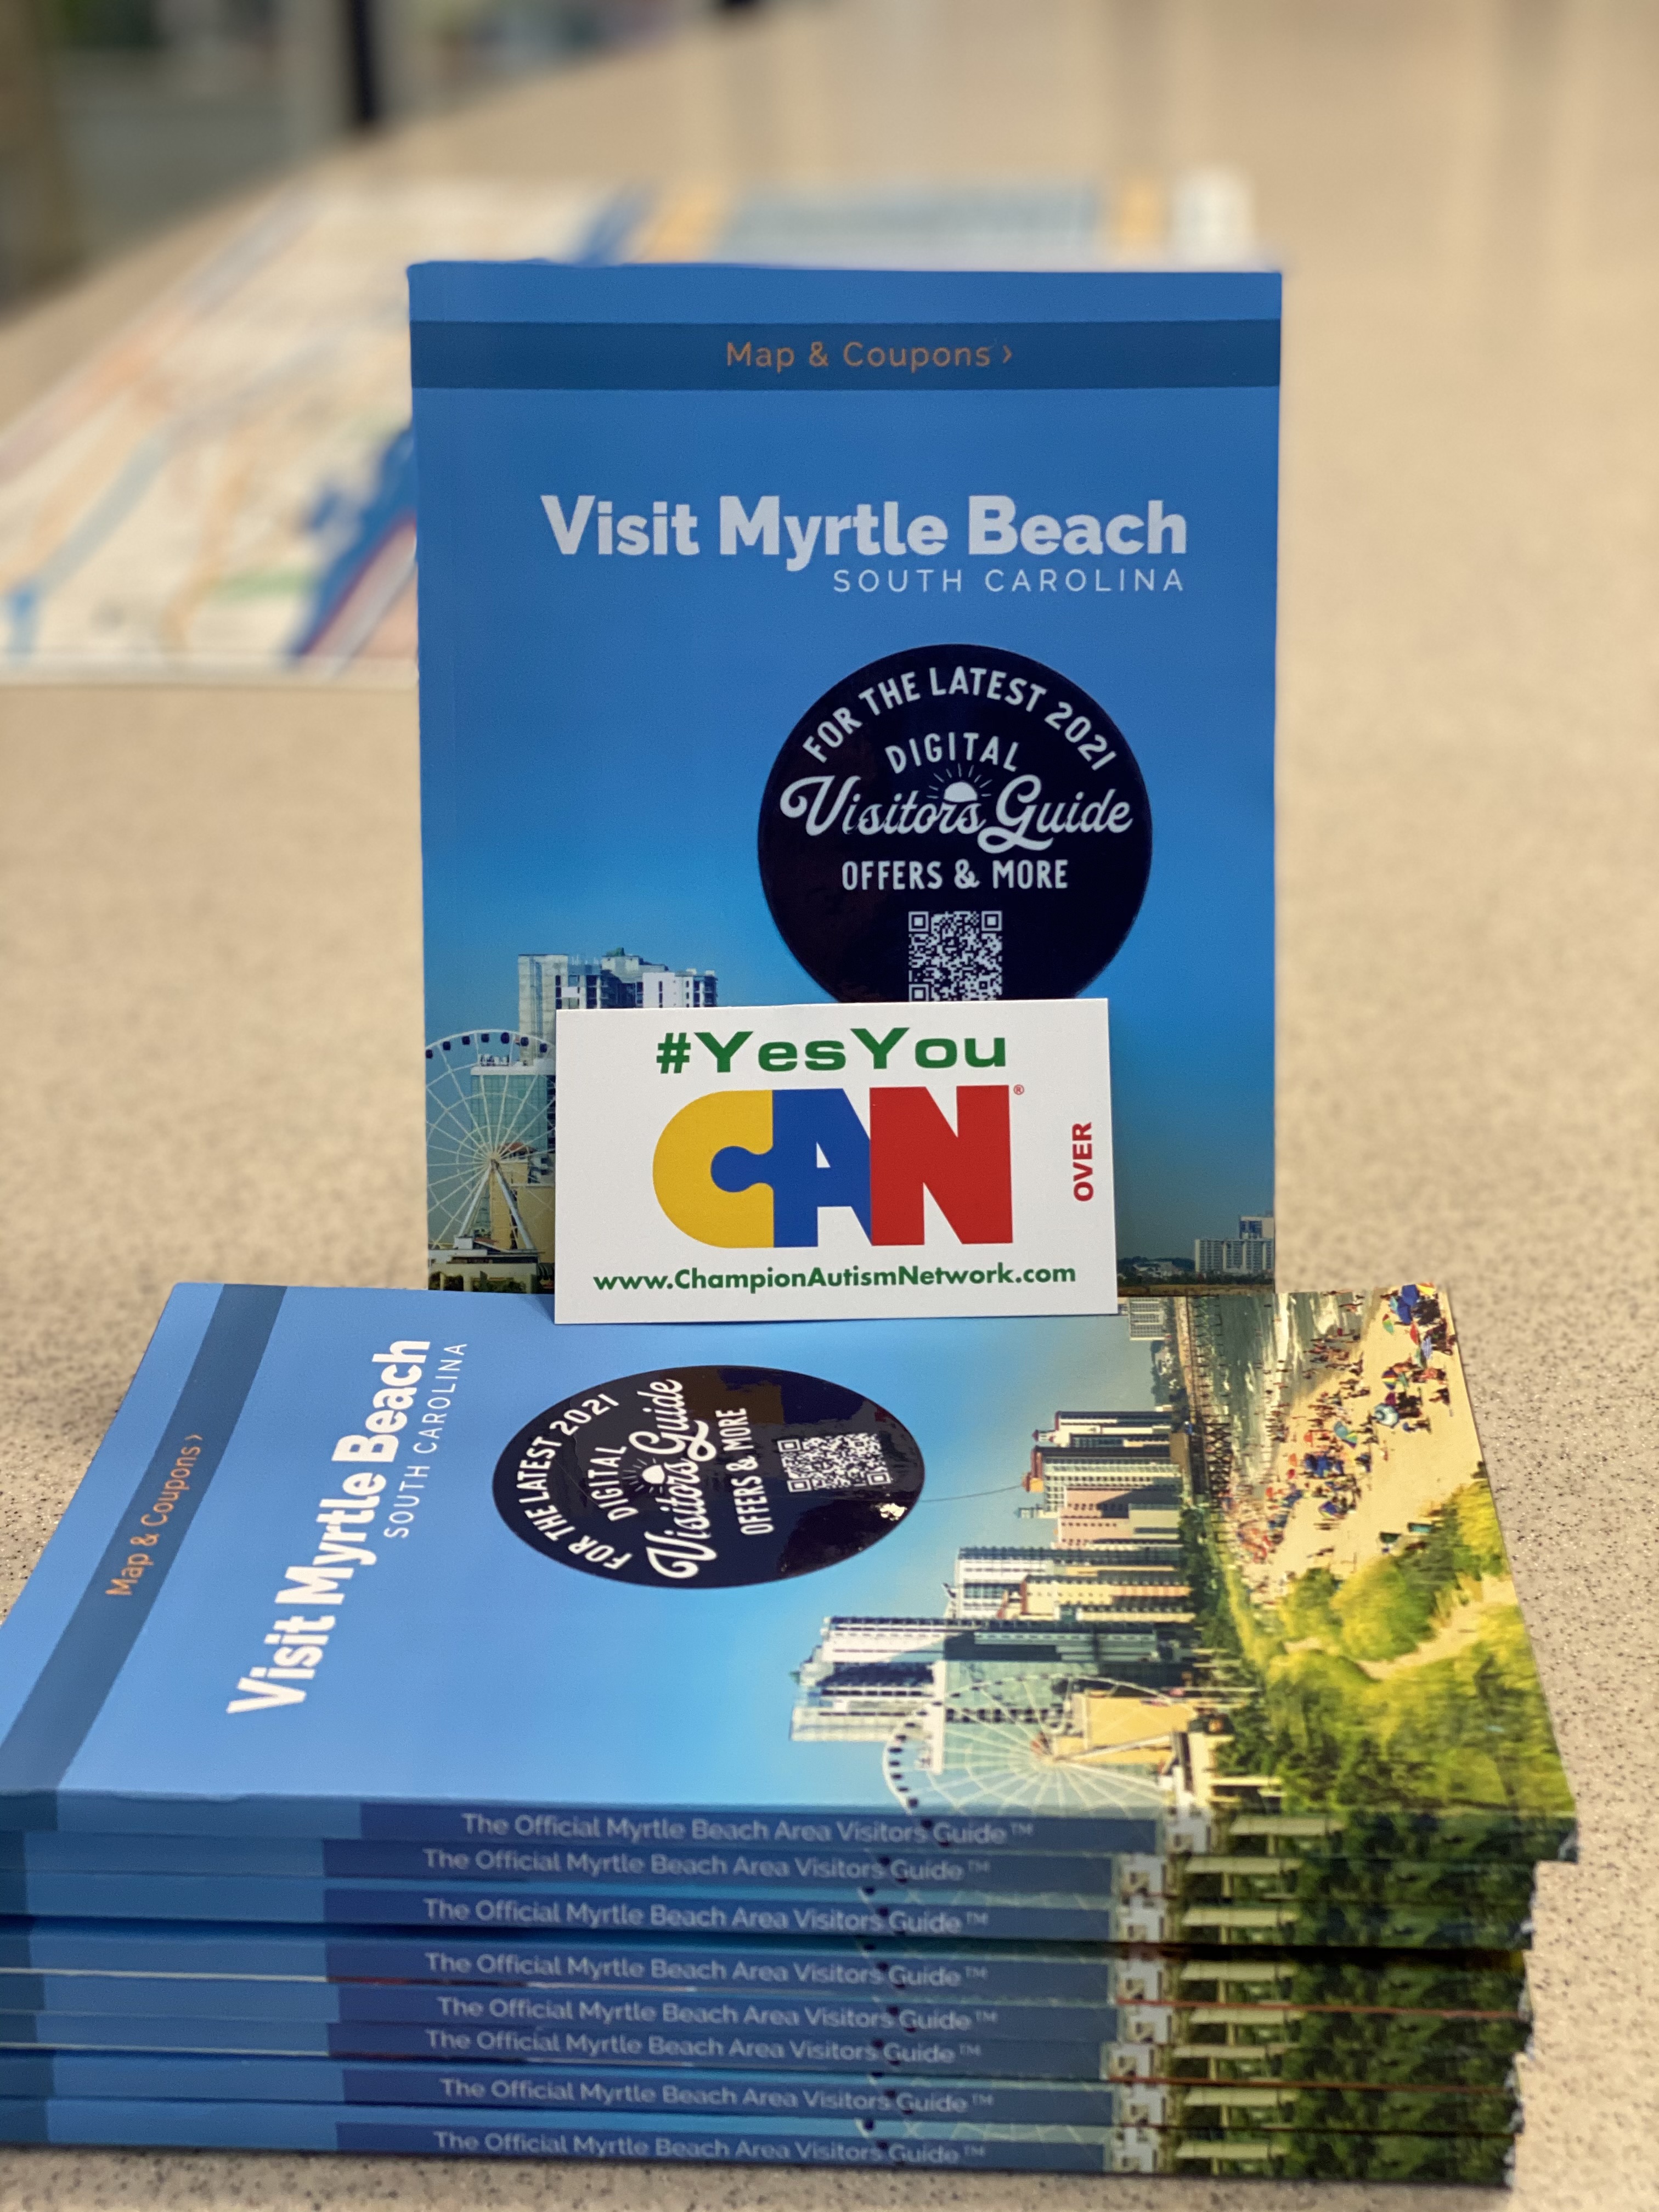 visit myrtle beach coupon book and champion autism network card